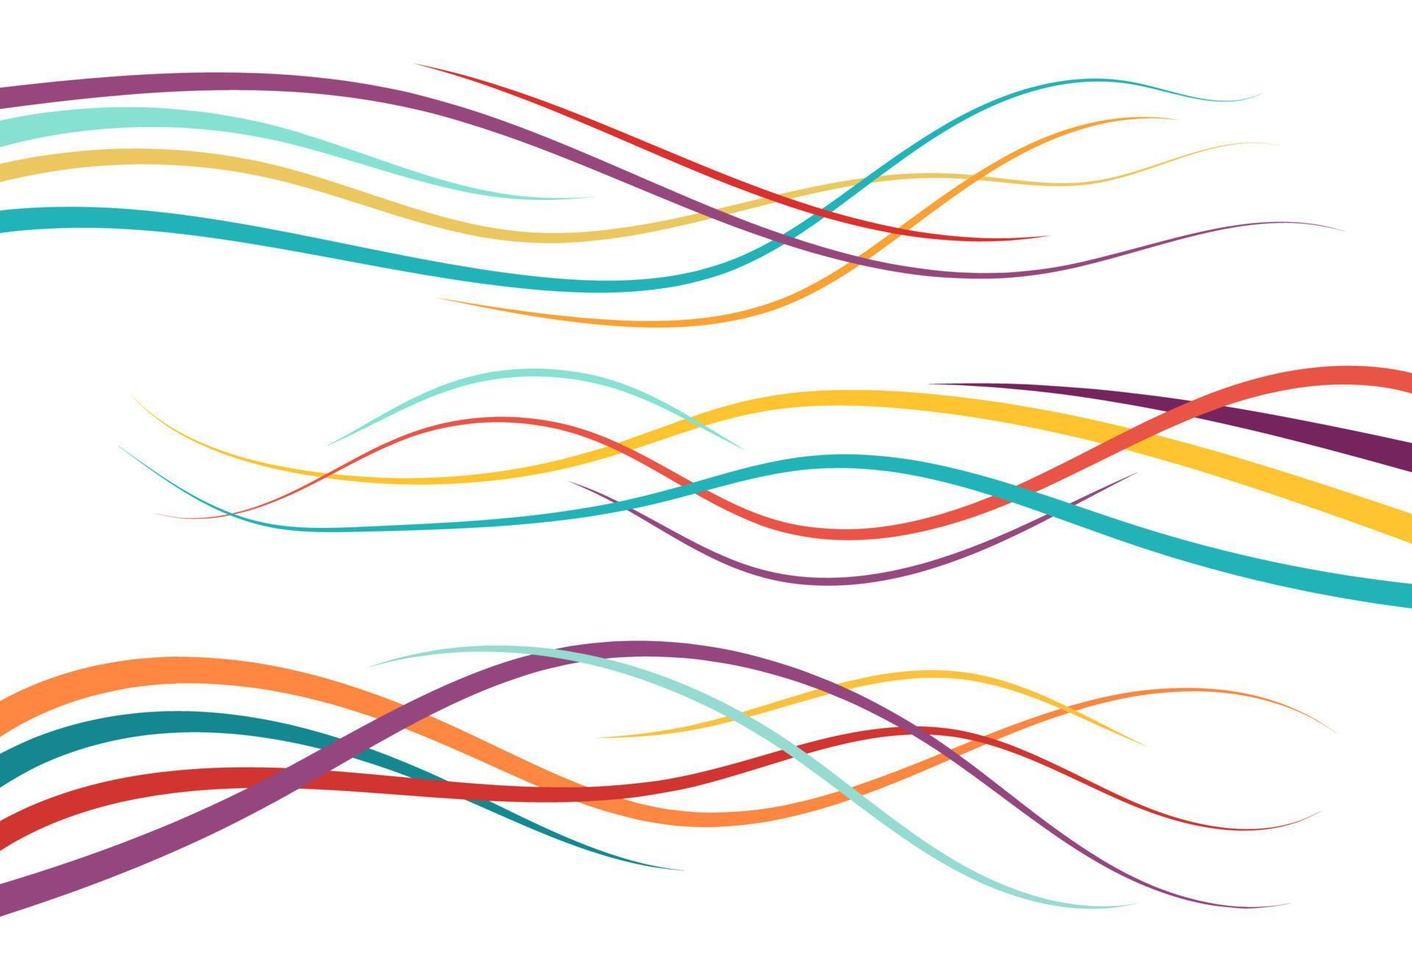 Set of abstract color curved lines. Wave design element. Vector illustration.